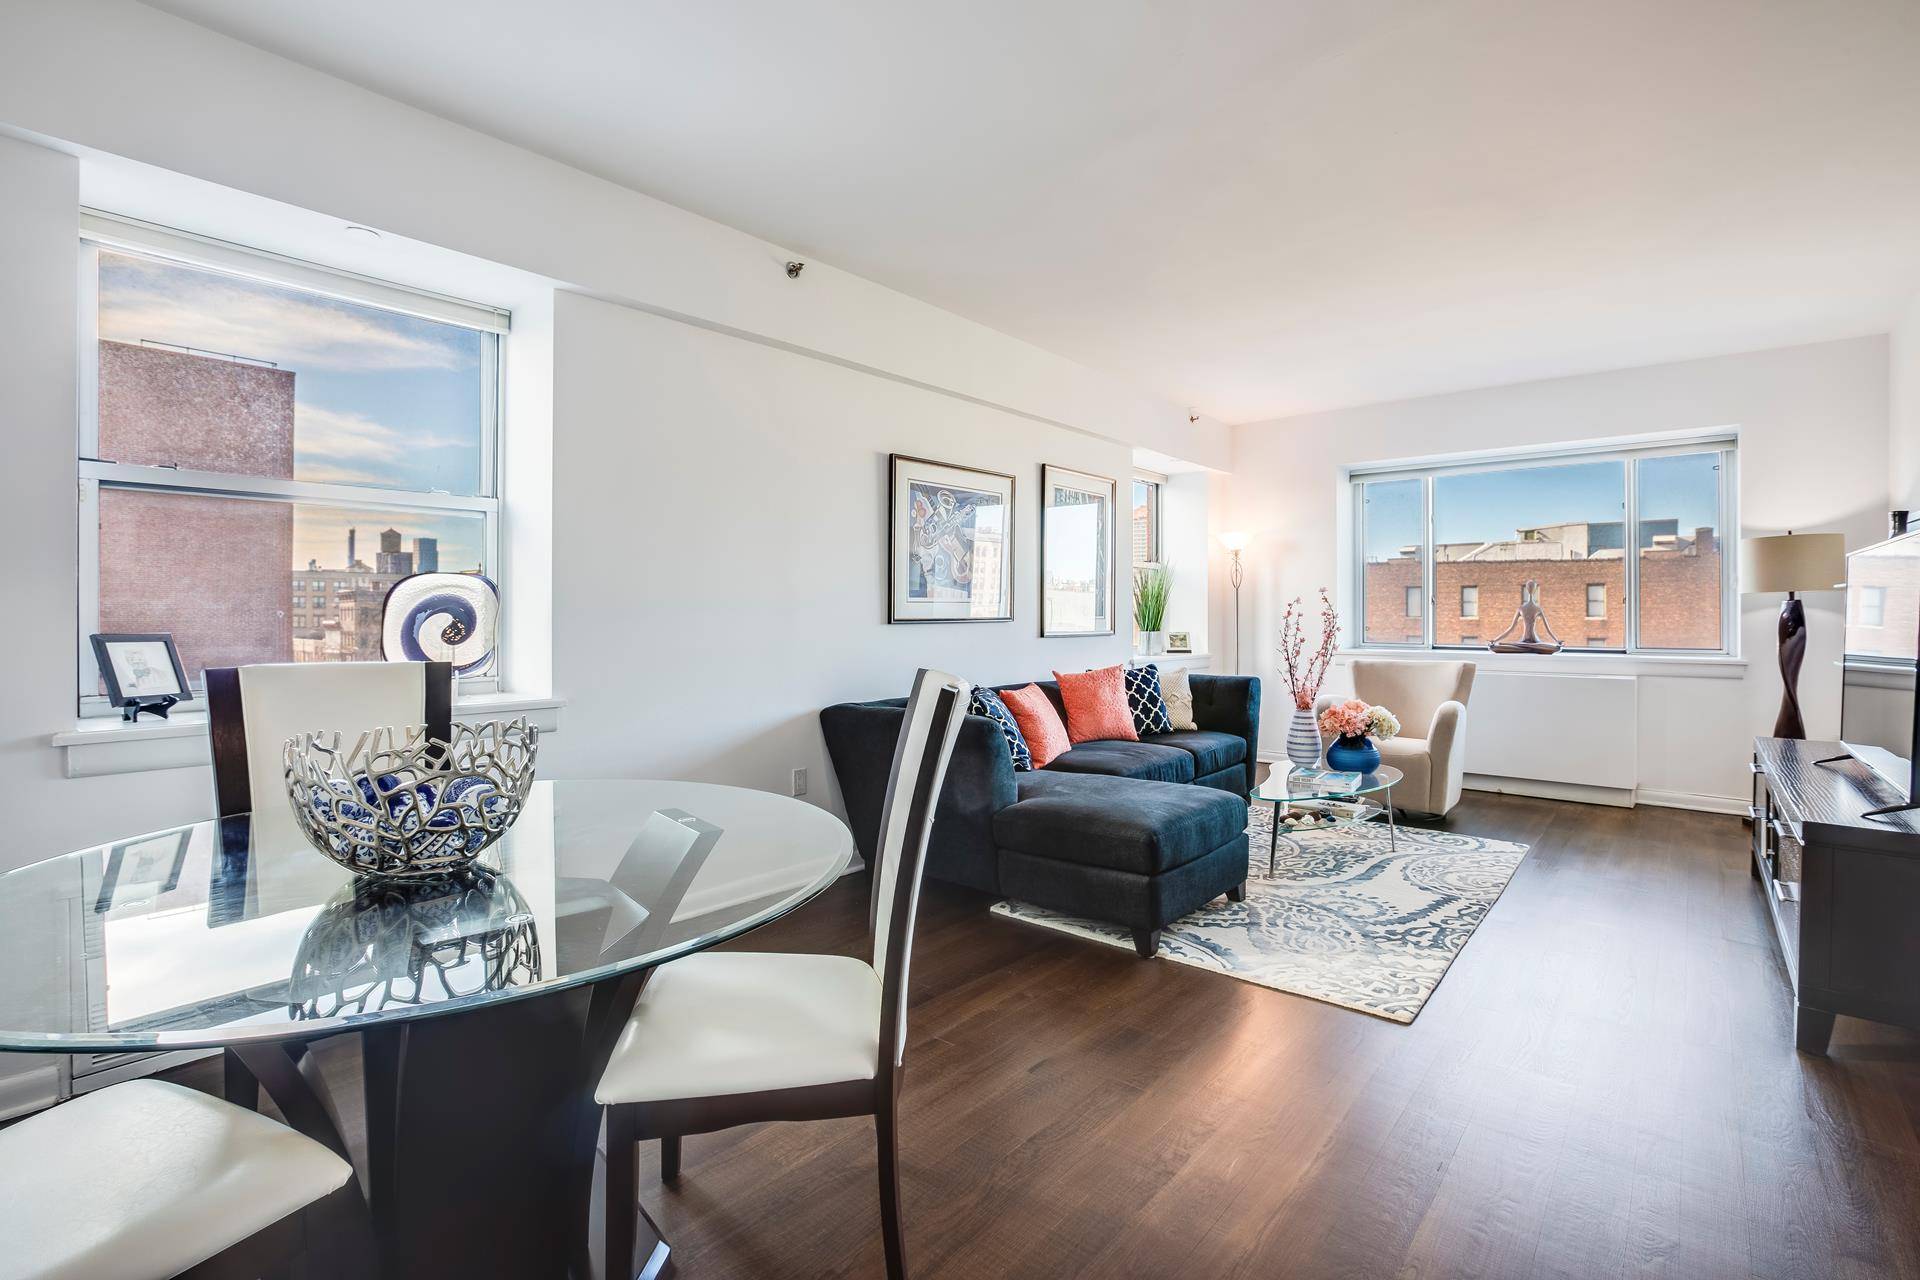 Welcome home to the unusually spacious 4A at the Bridge Condominium in East Harlem.